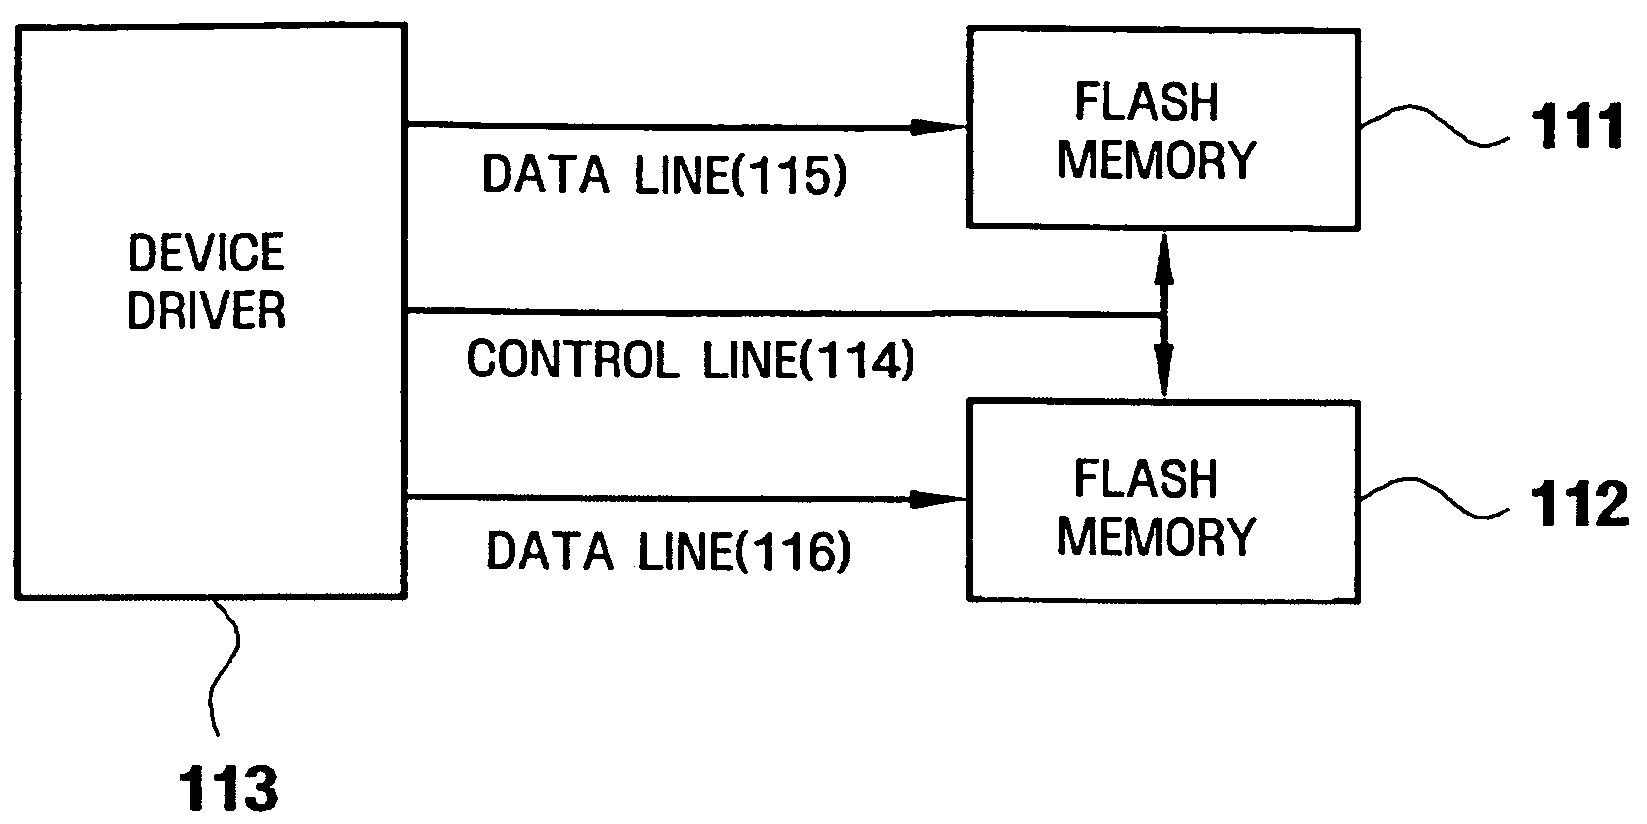 Data management apparatus and method of flash memory